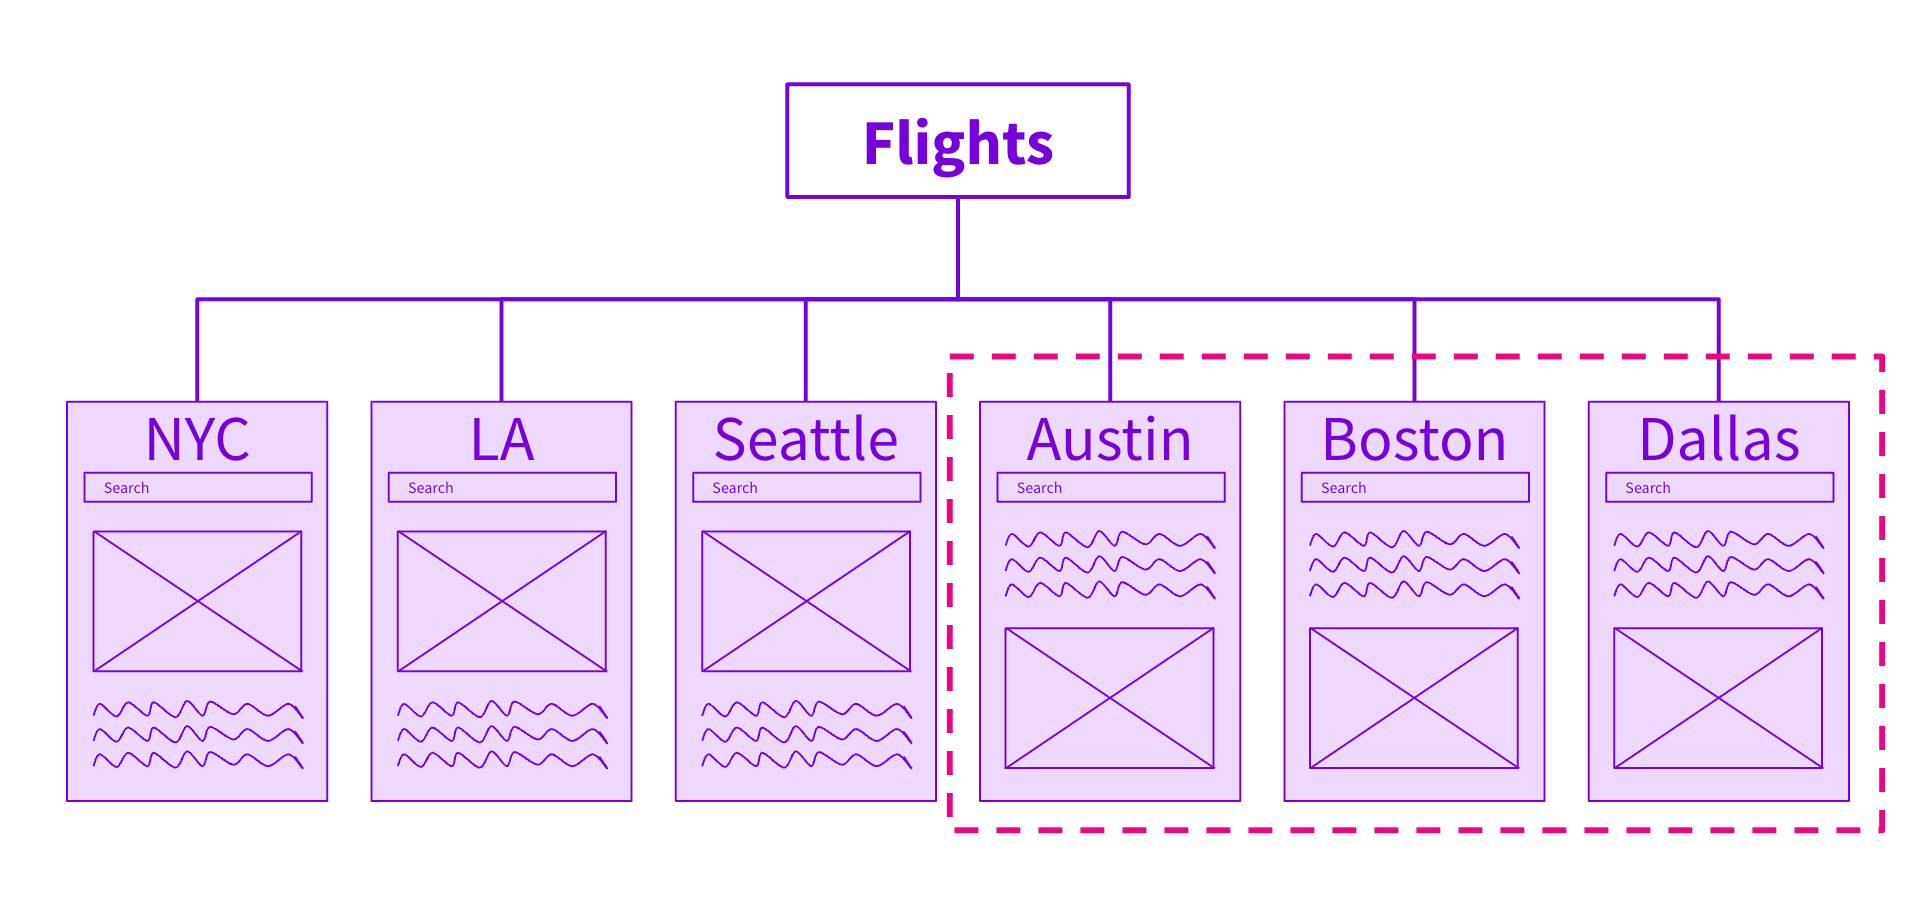 Making changes to variant flight pages for Austin, Dallas, and Boston